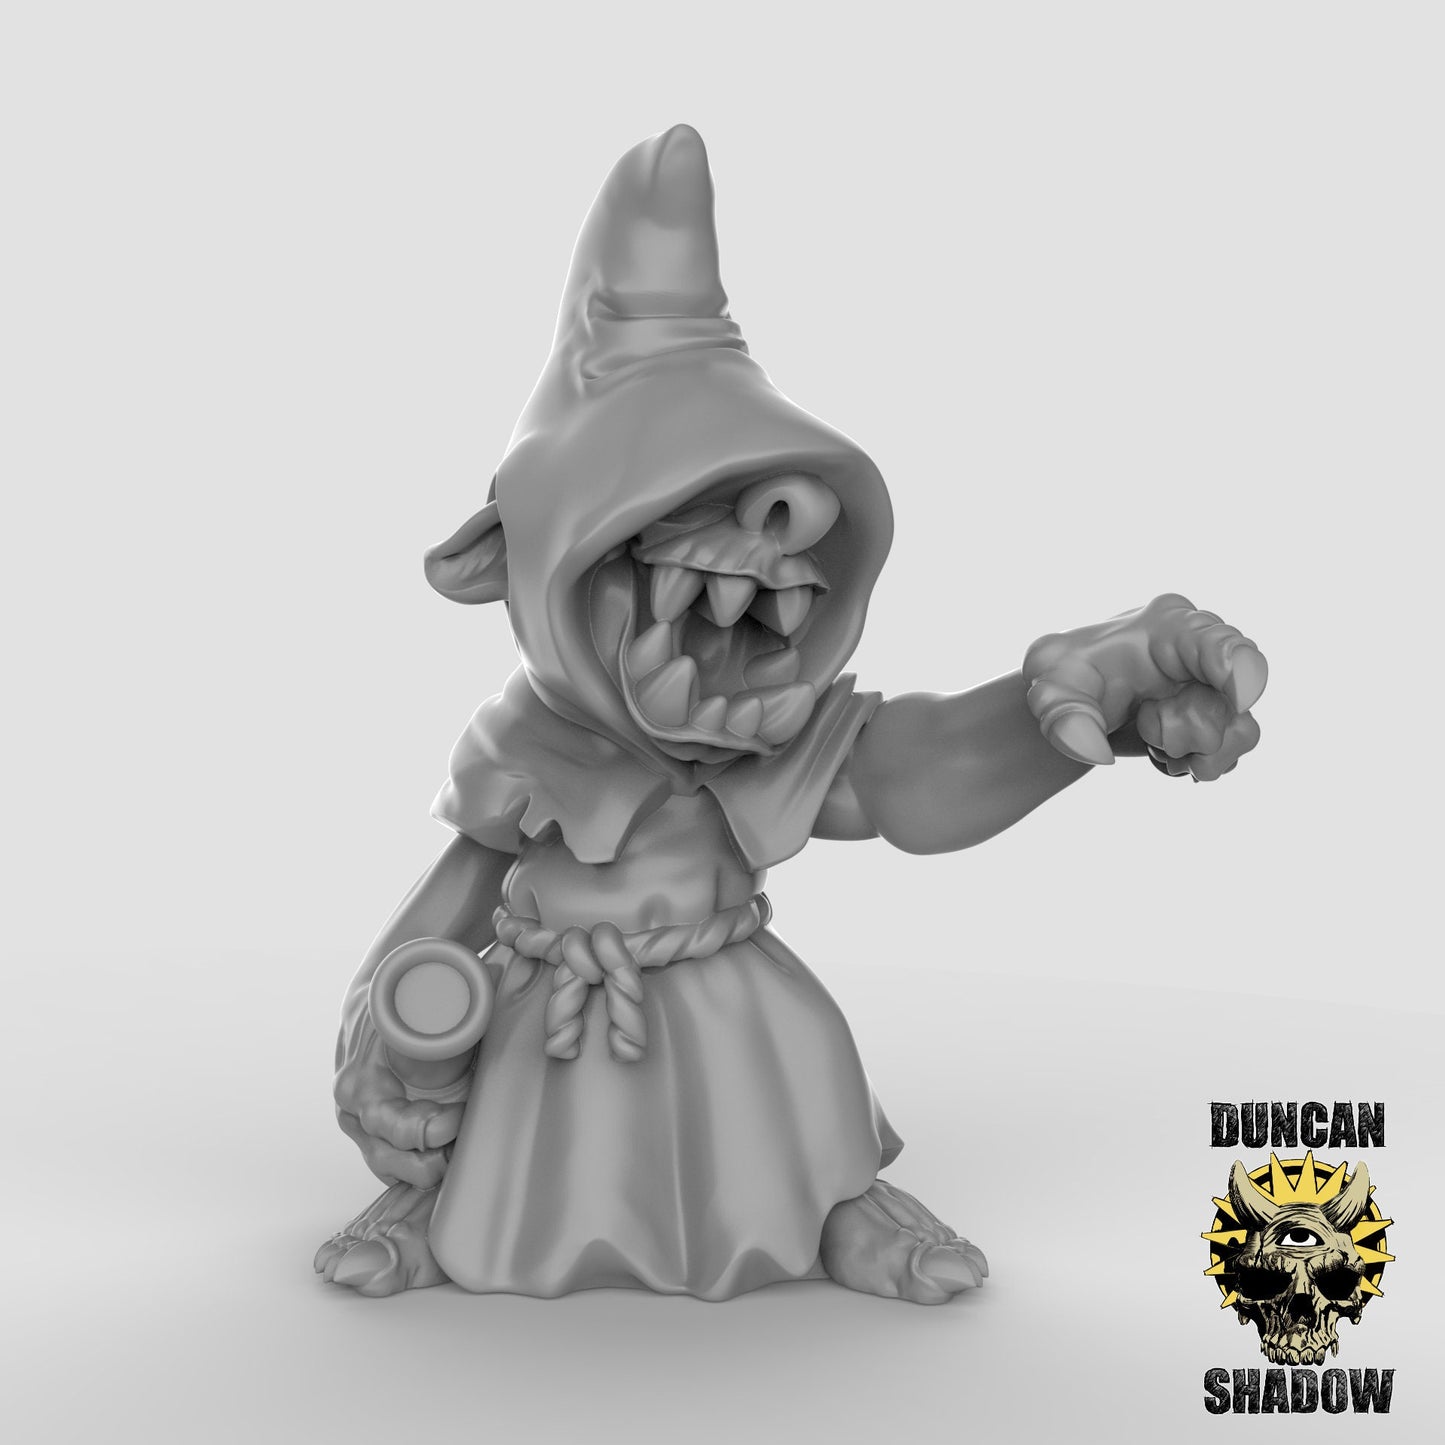 Goblin Bolt Throwers - 3 Duncan Shadow Printed Miniatures | Dungeons & Dragons | Pathfinder | Tabletop